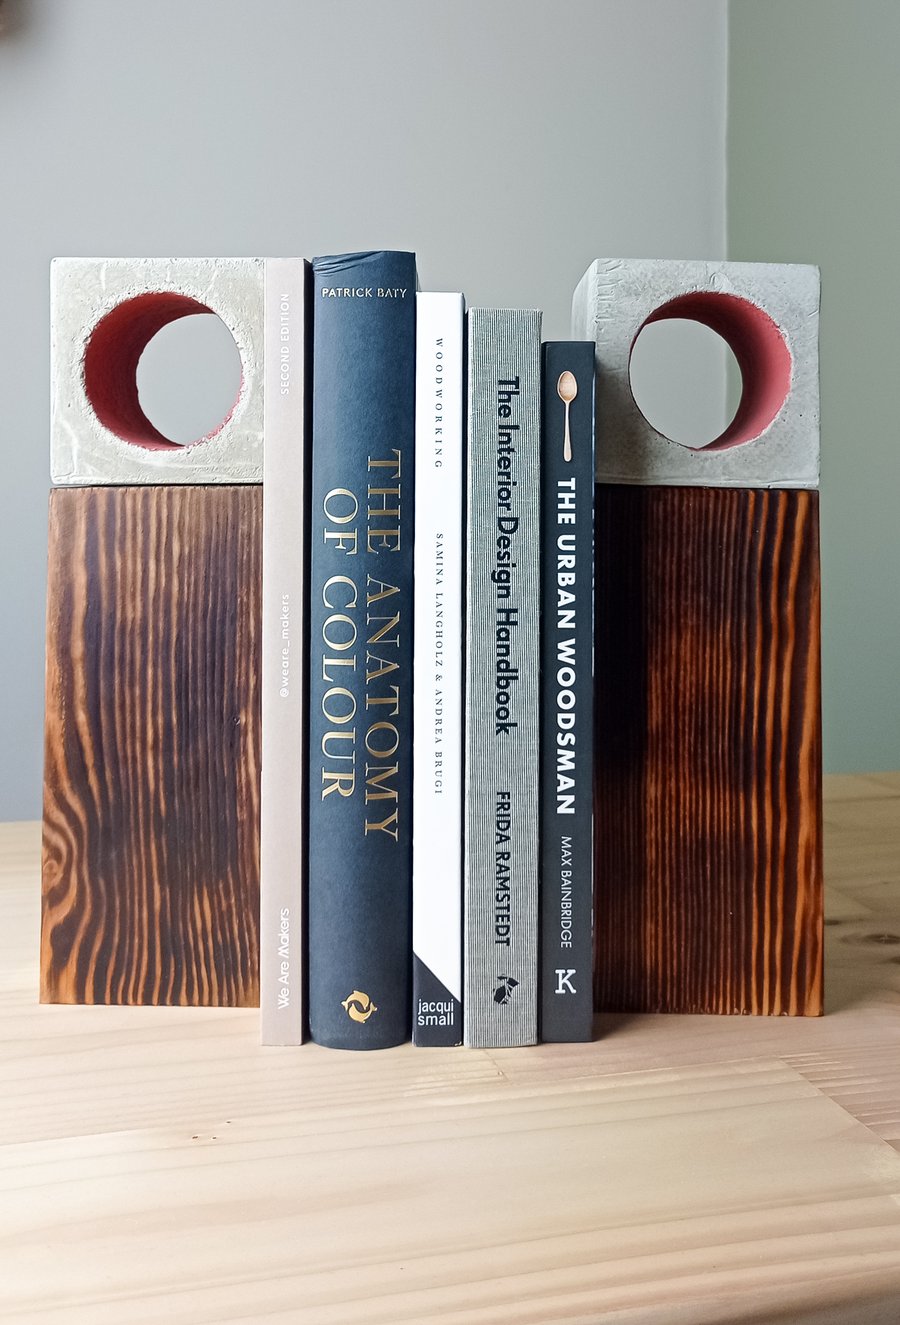 Wooden bookends - Bookends from reclaimed wood - Wood and concrete bookends